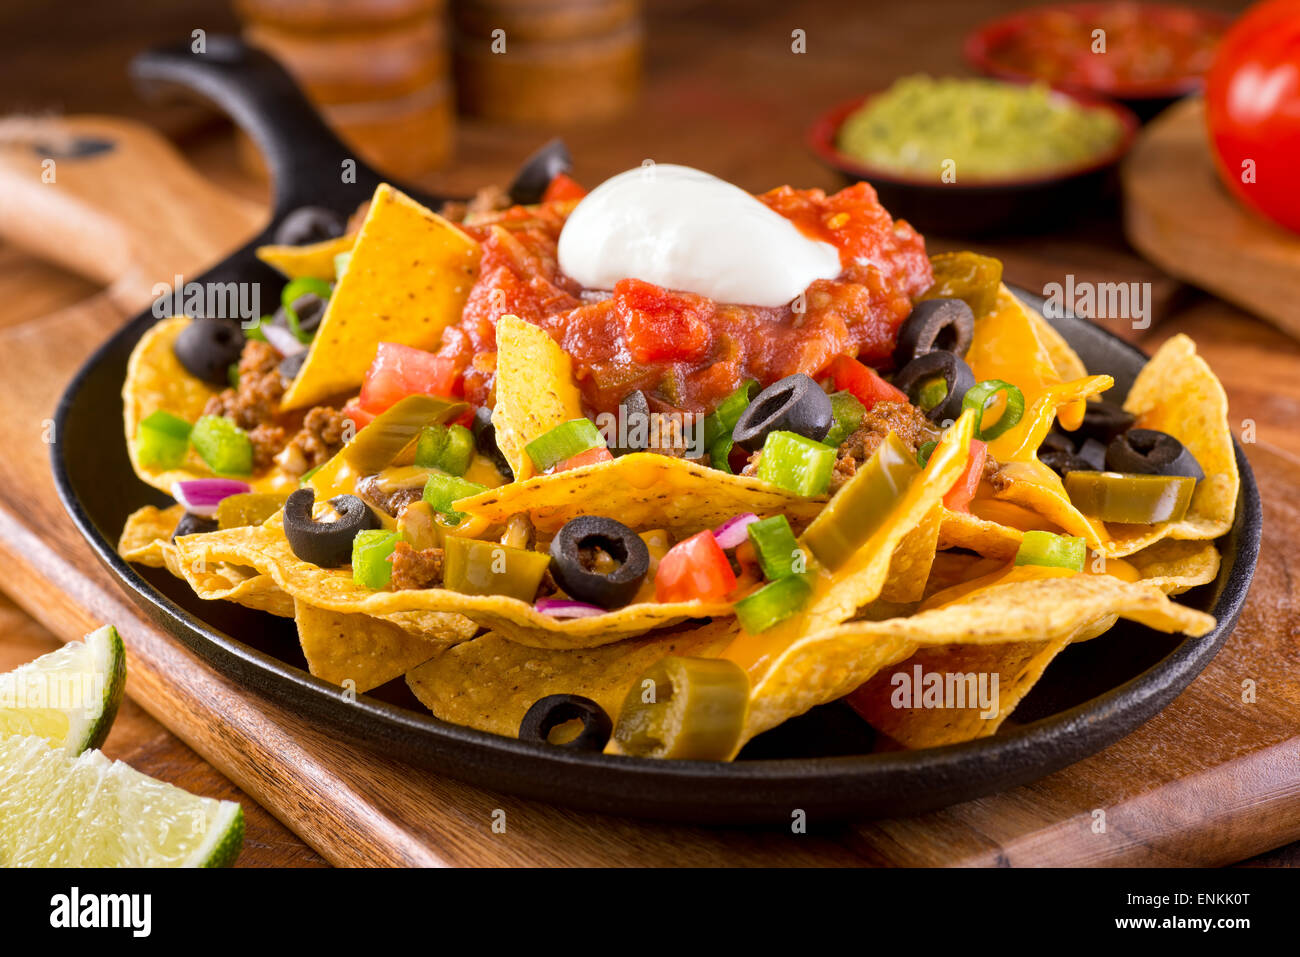 A plate of delicious tortilla nachos with melted cheese sauce, ground ...